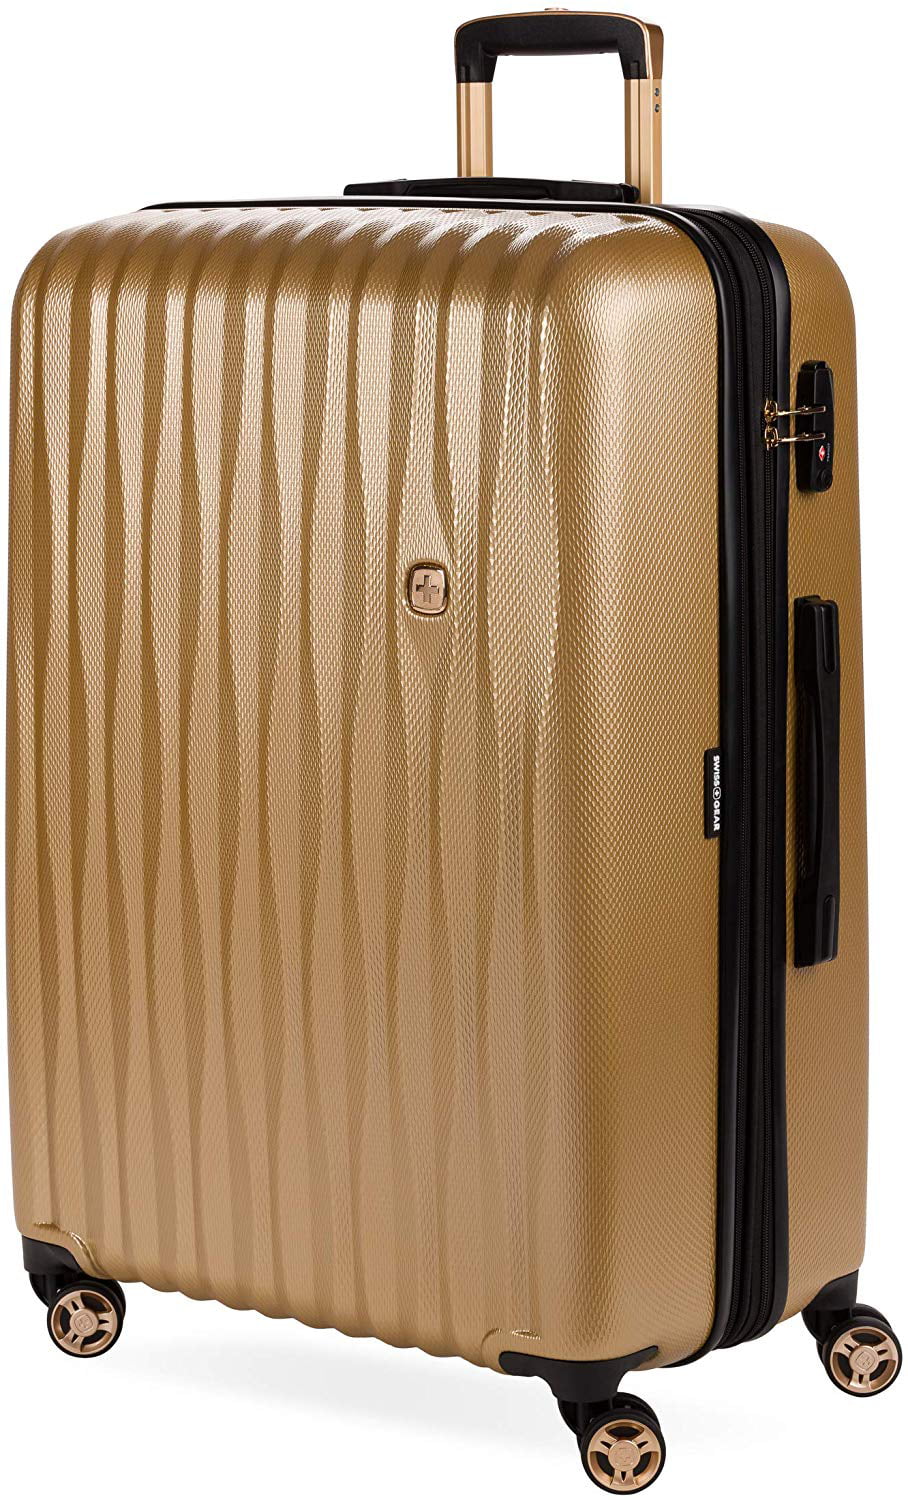 Swiss Gear Energie Hardside Polycarbonate Spinner Luggage w/ Internal Zippered And Two Cinched Front Pockets